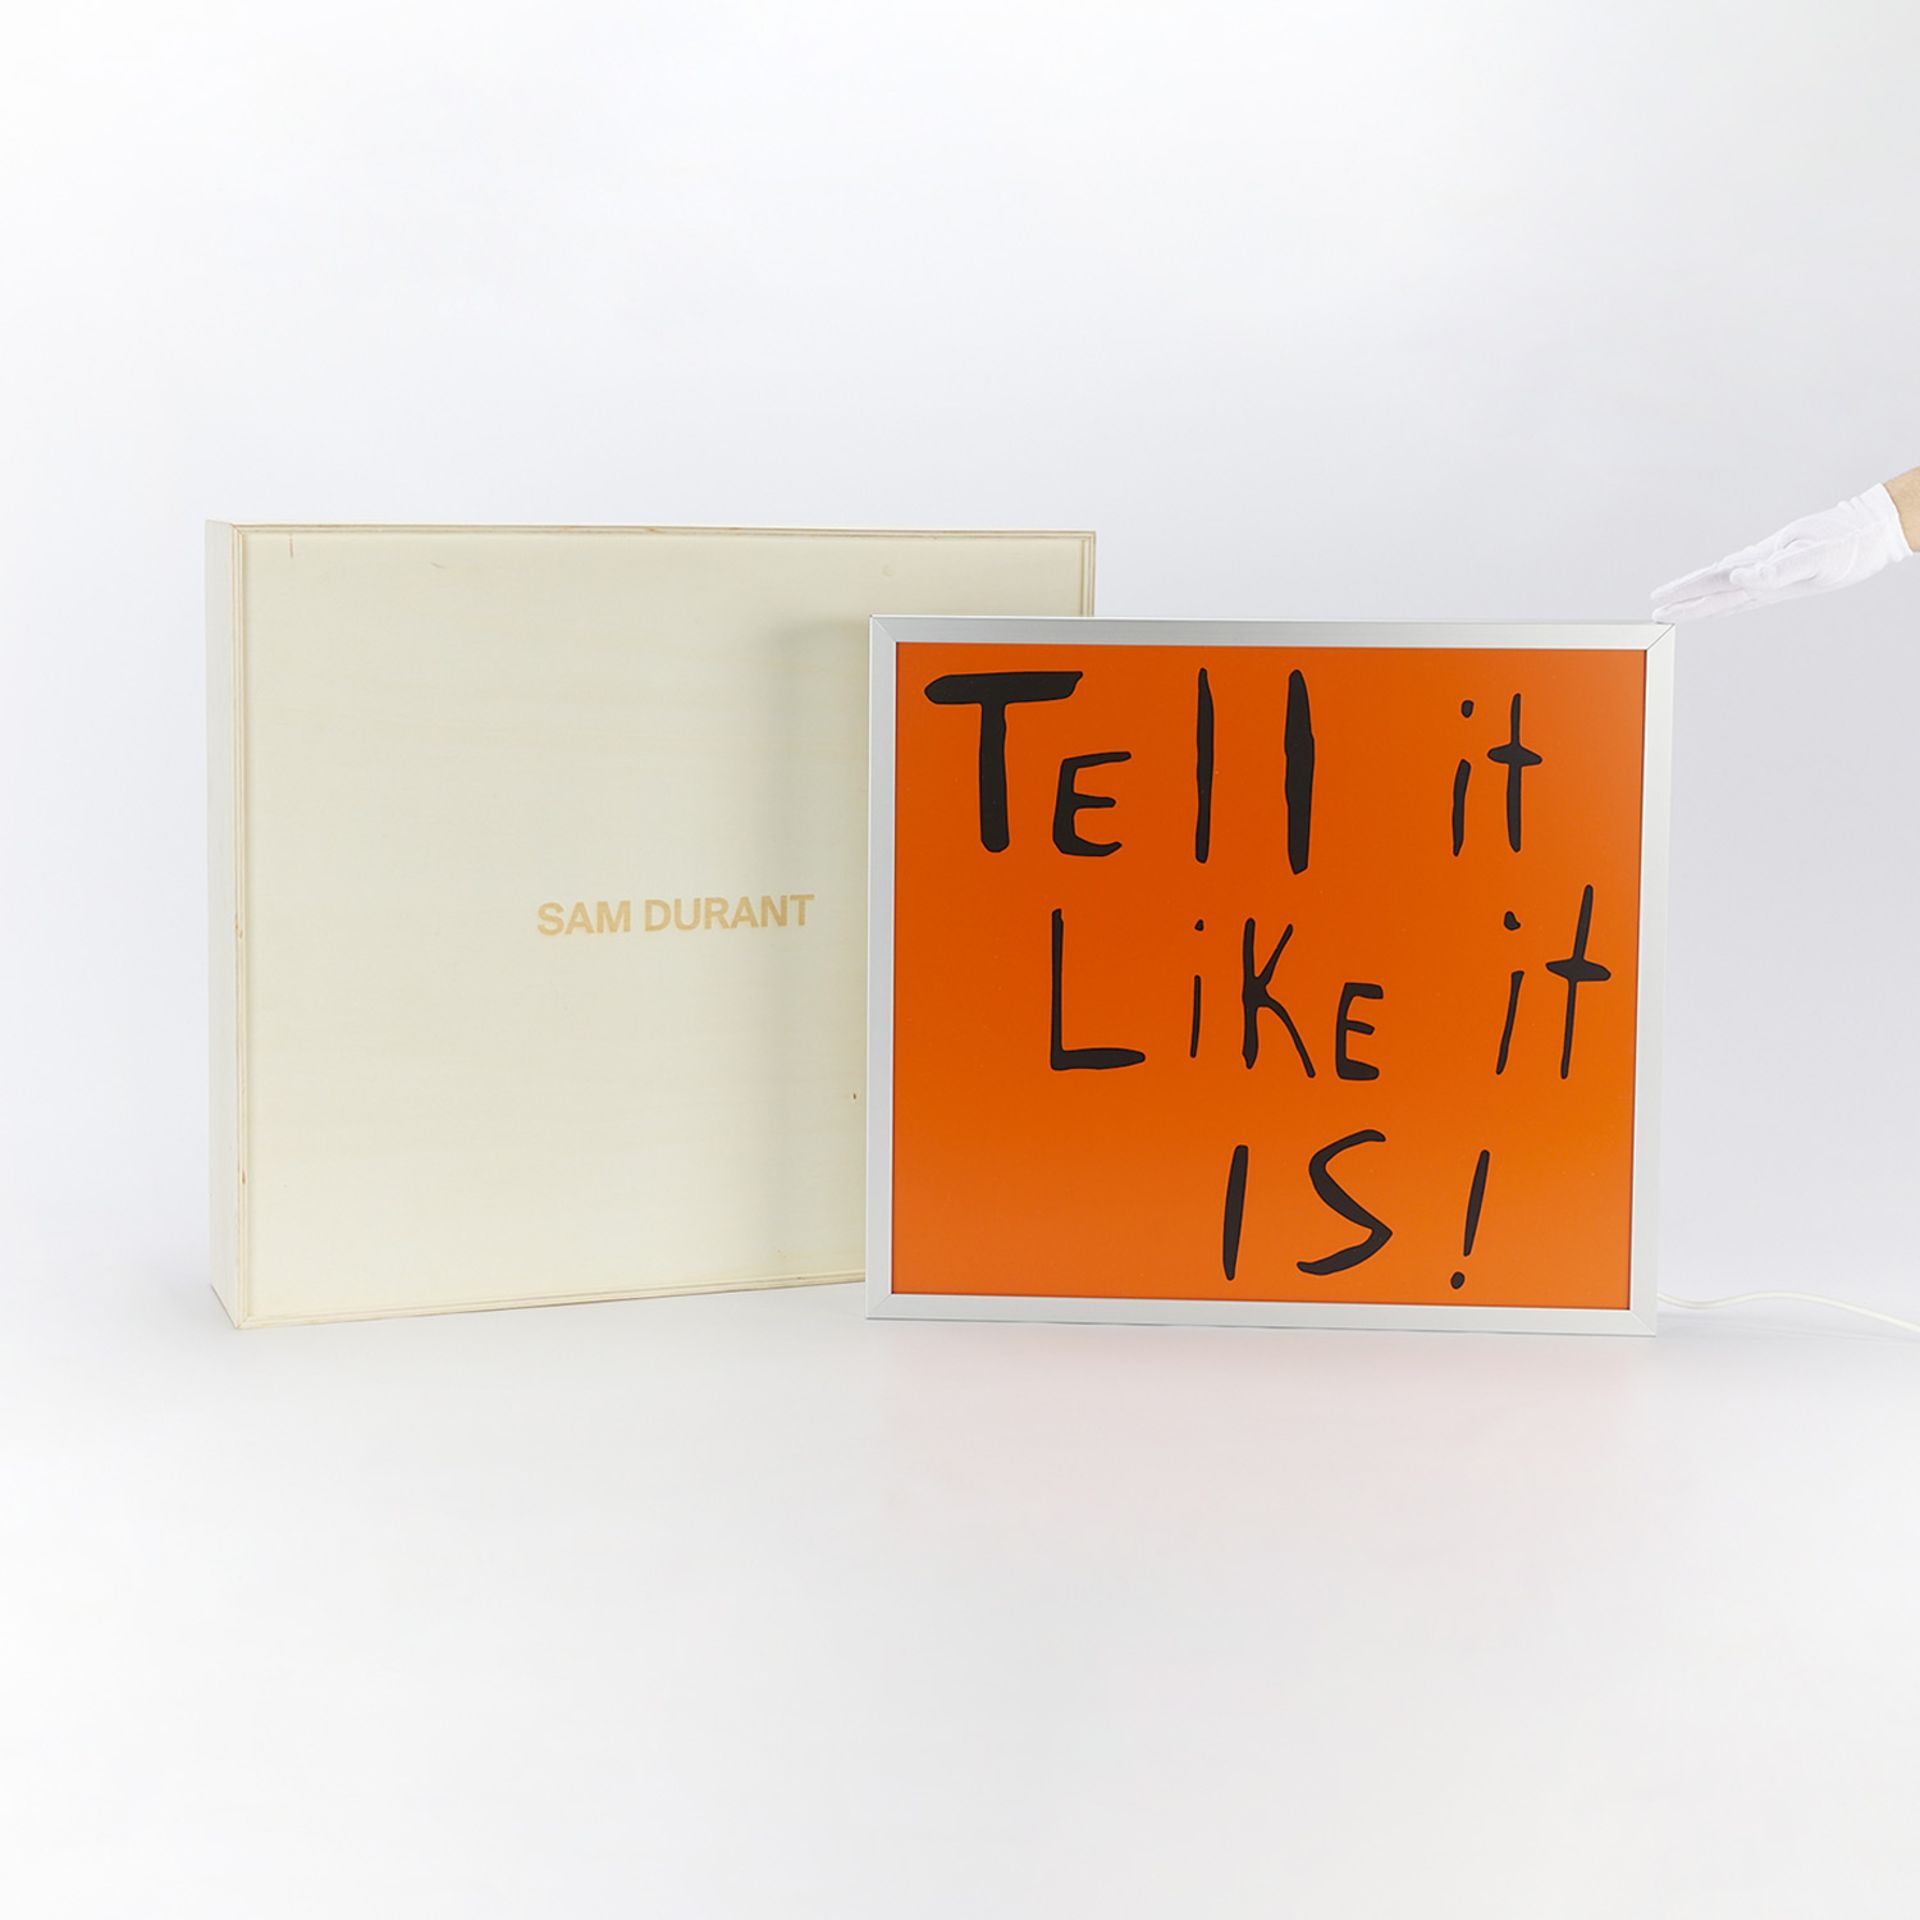 Sam Durant "Tell It Like It Is" Electric Sign 2020 - Image 2 of 11